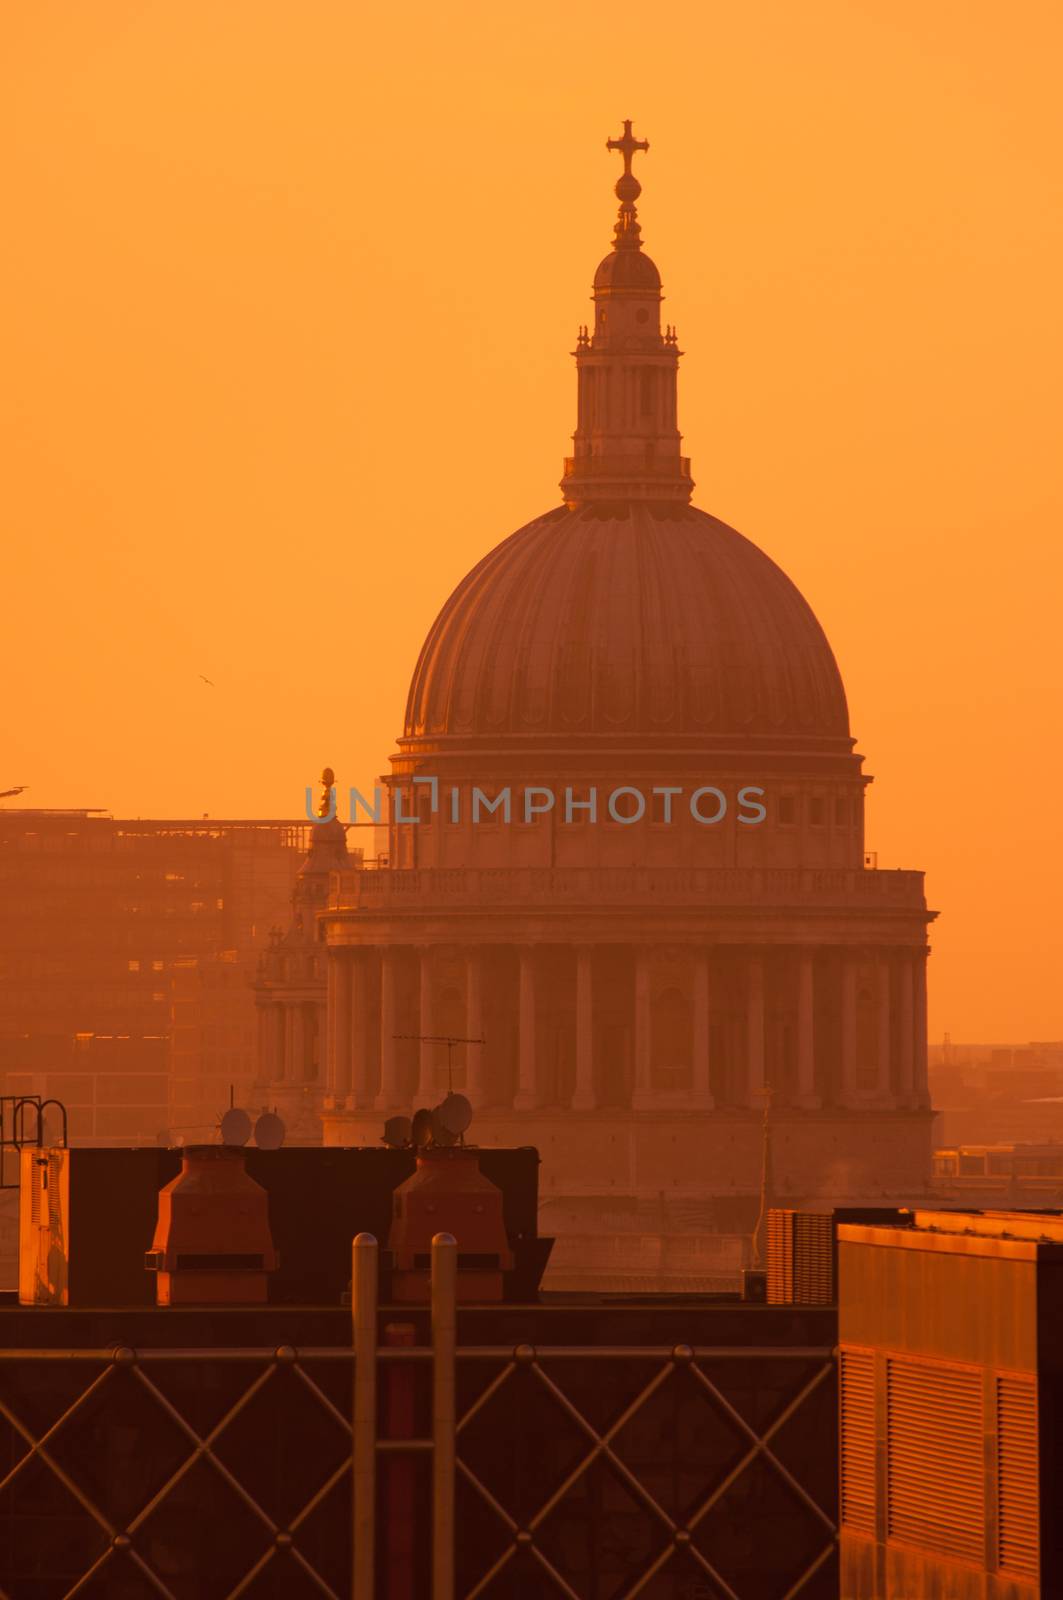 London's famous tourist landmark and place of worship St Pauls Cathedral at sunset 